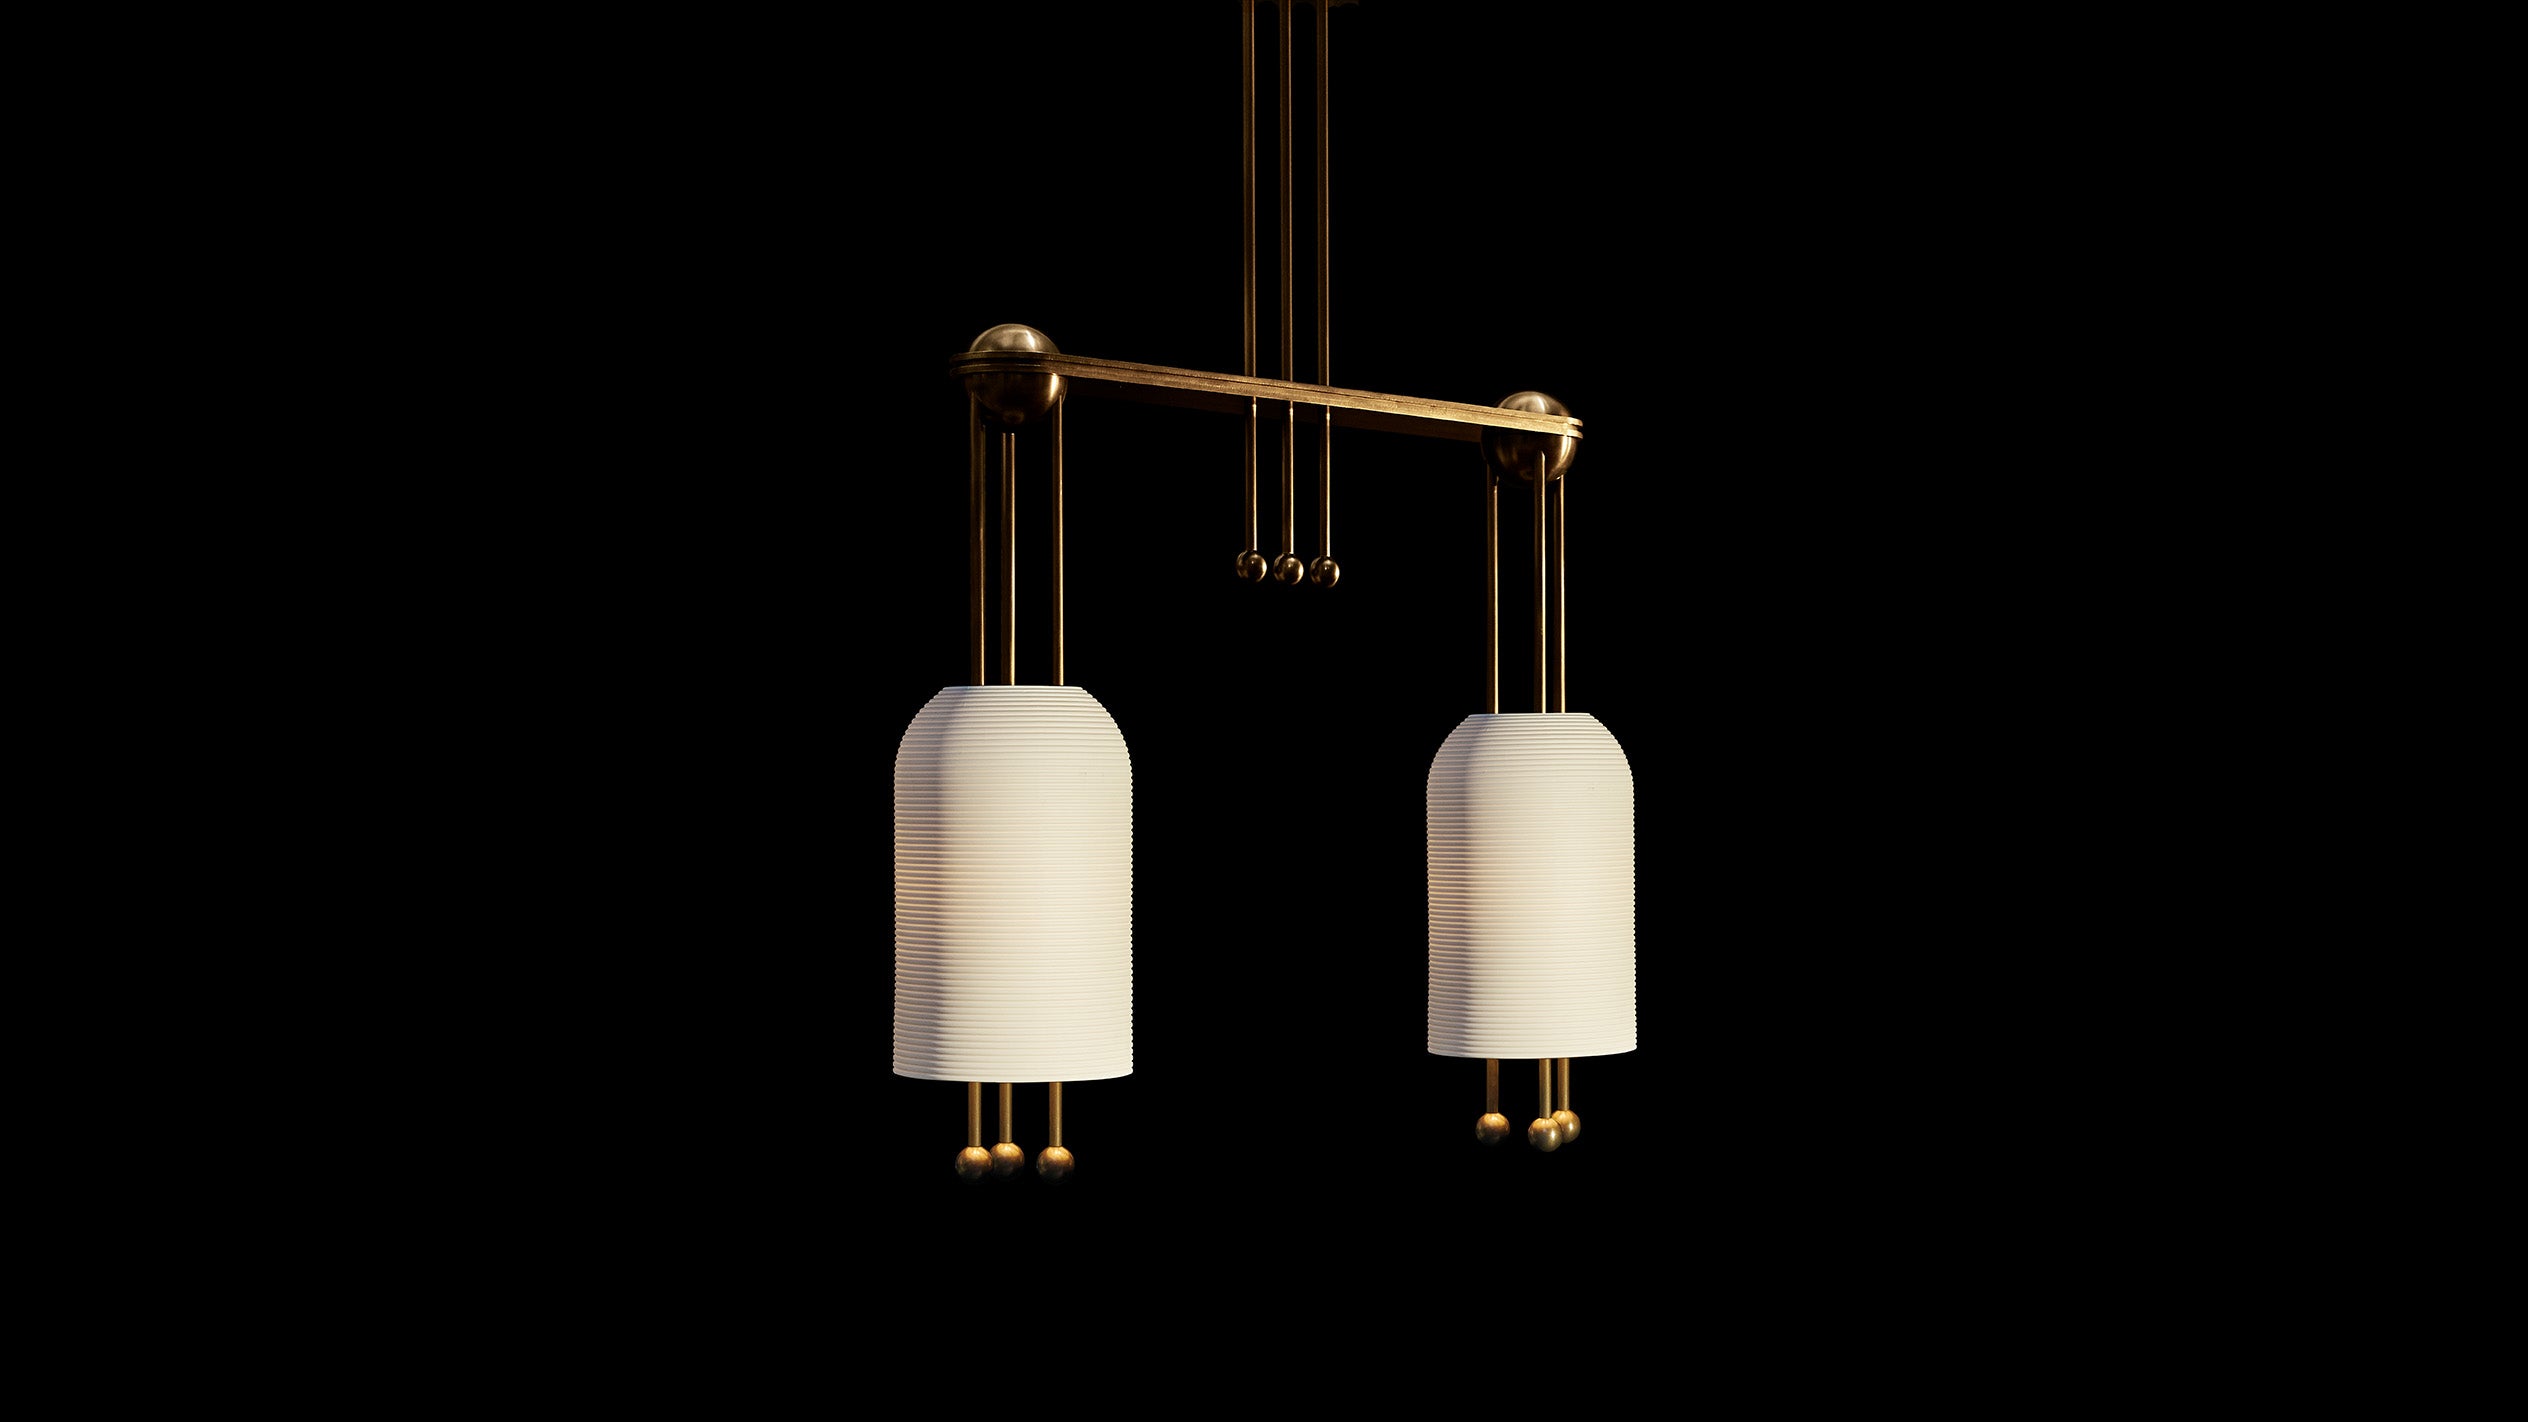 LANTERN : 2 ceiling pendant in Aged Brass finish hanging against a black background. 